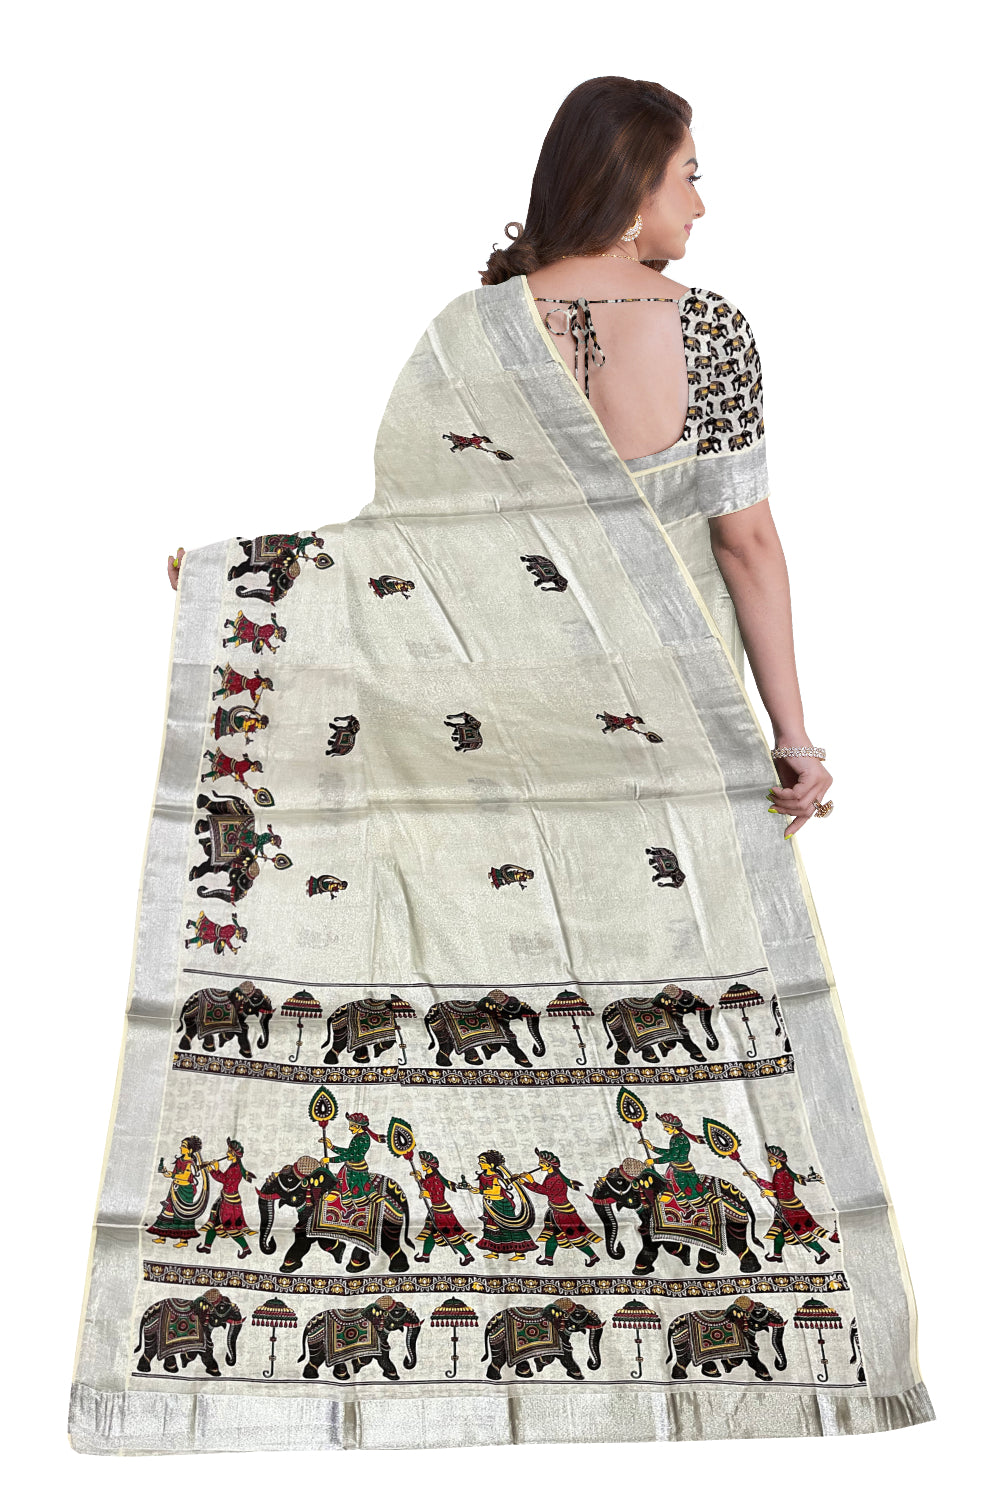 Kerala Silver Tissue Kasavu Saree With Mural Festival Parasol and Elephant Design (include Printed Running Blouse)